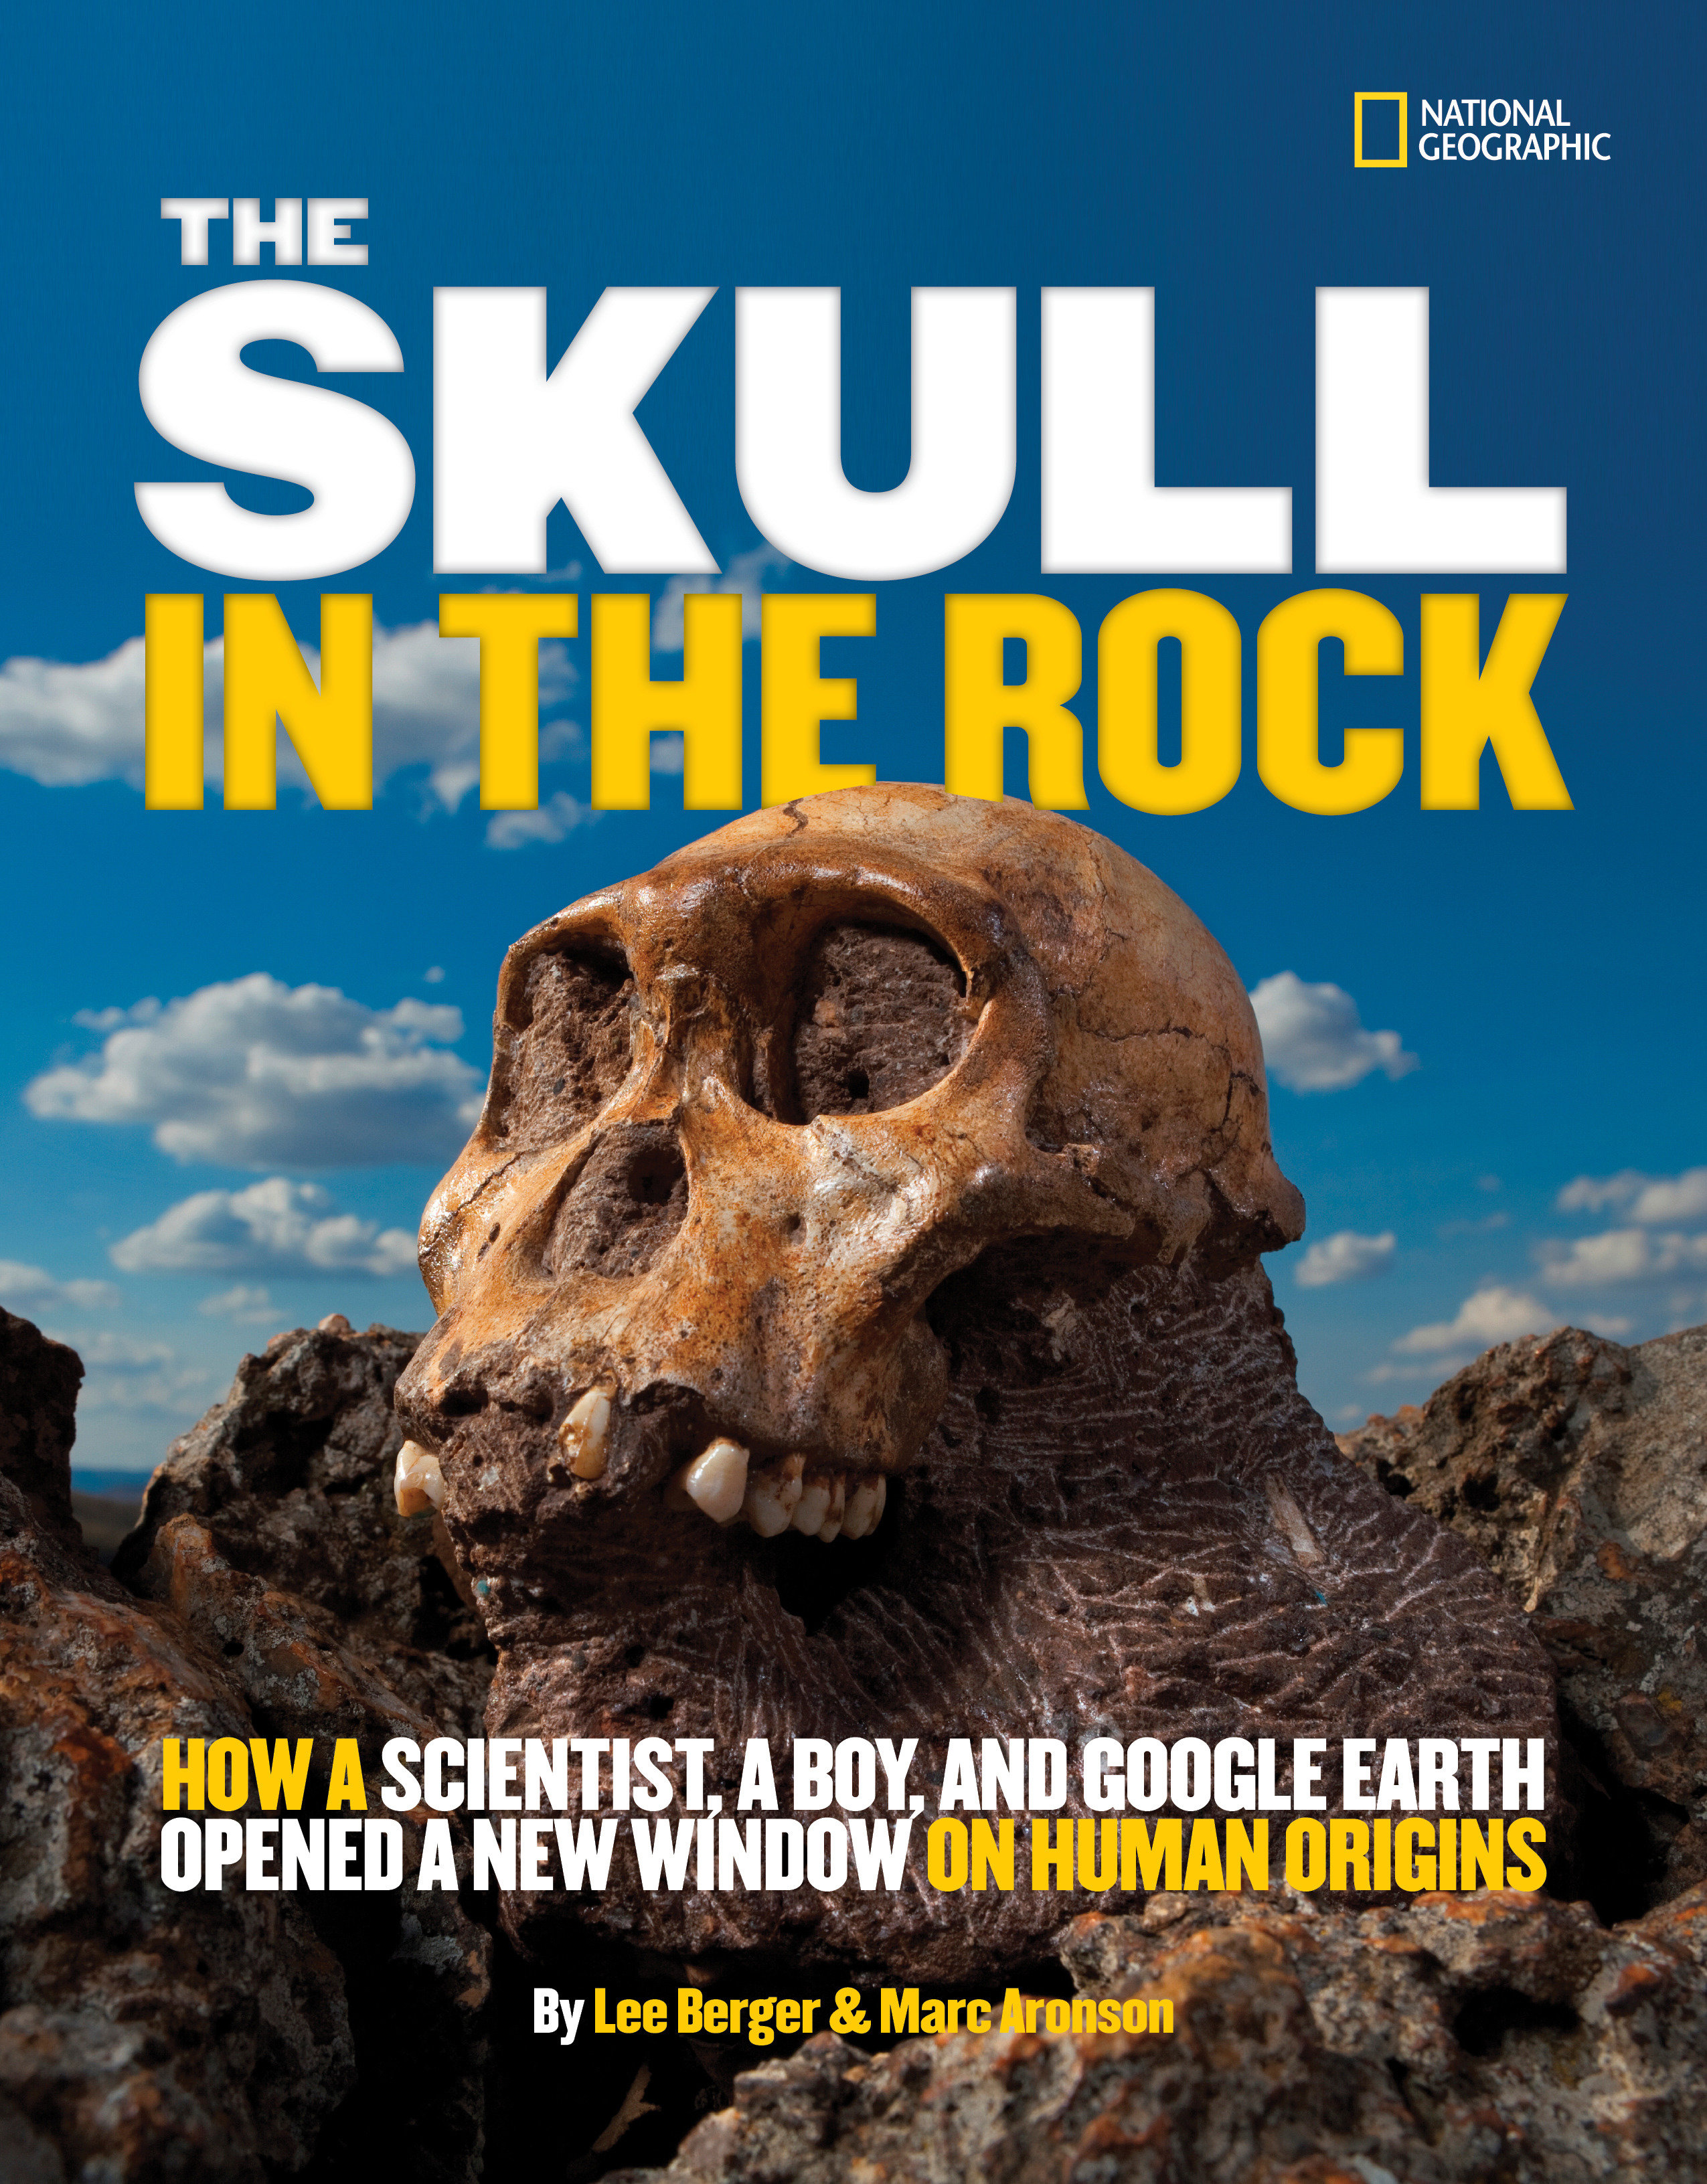 Skull In The Rock, The (Hardcover Book)